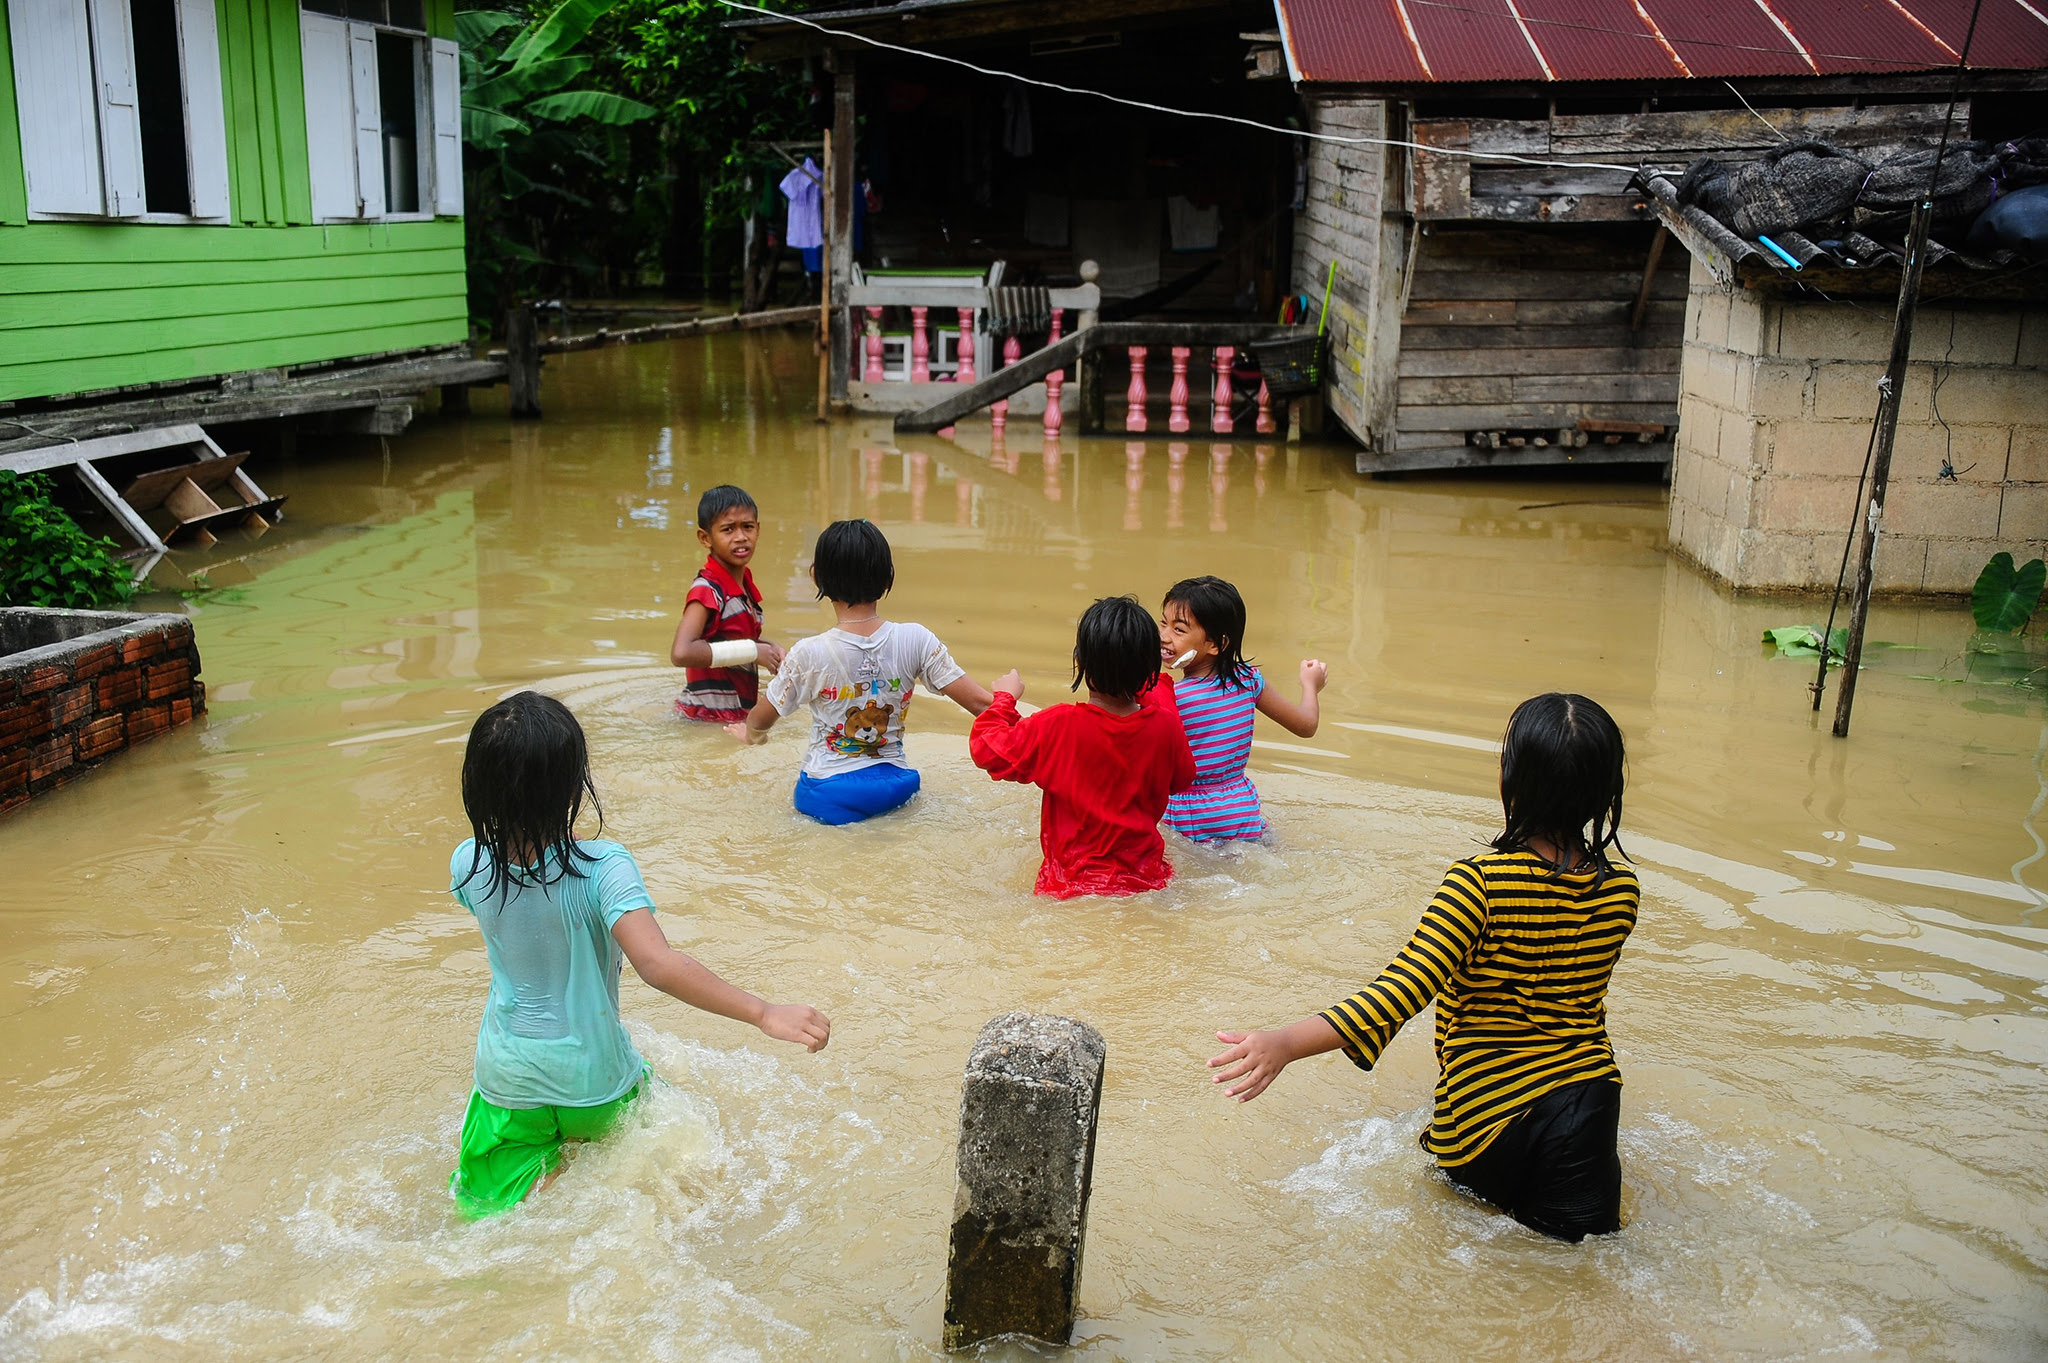 Children play near houses inundated by floodwaters after heavy rains in the Rangae district of the southern province of Narathiwat on December 21, 2016. / AFP PHOTO / MADAREE TOHLALAMADAREE TOHLALA/AFP/Getty Images